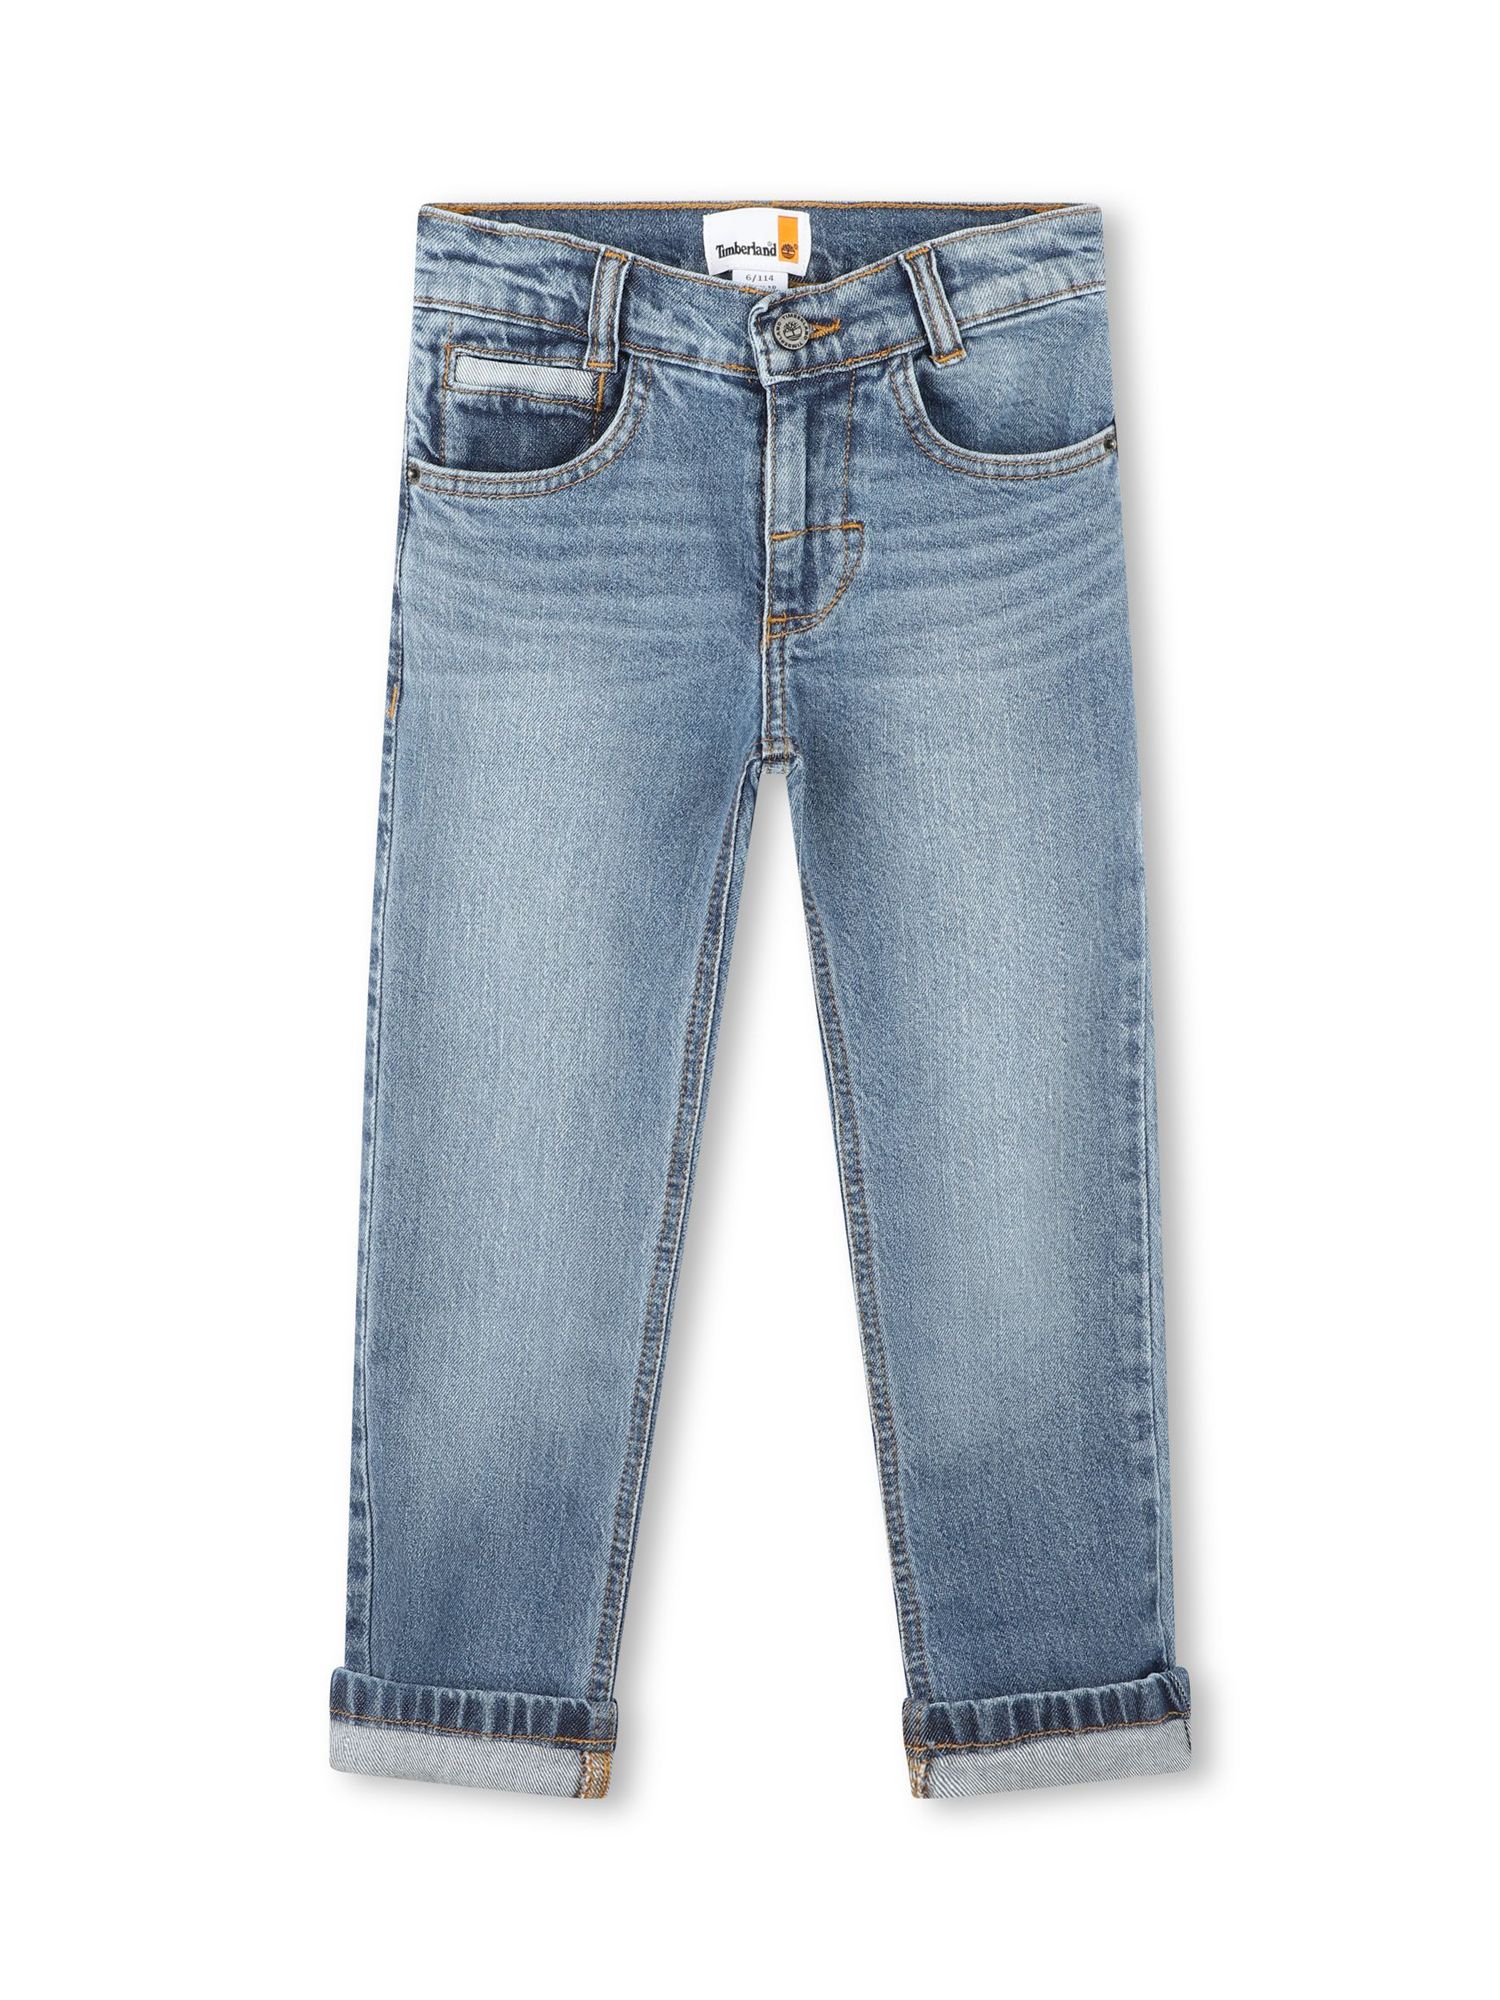 Buy Timberland Kids' New Fit Denim Trousers, Mid Blue Online at johnlewis.com